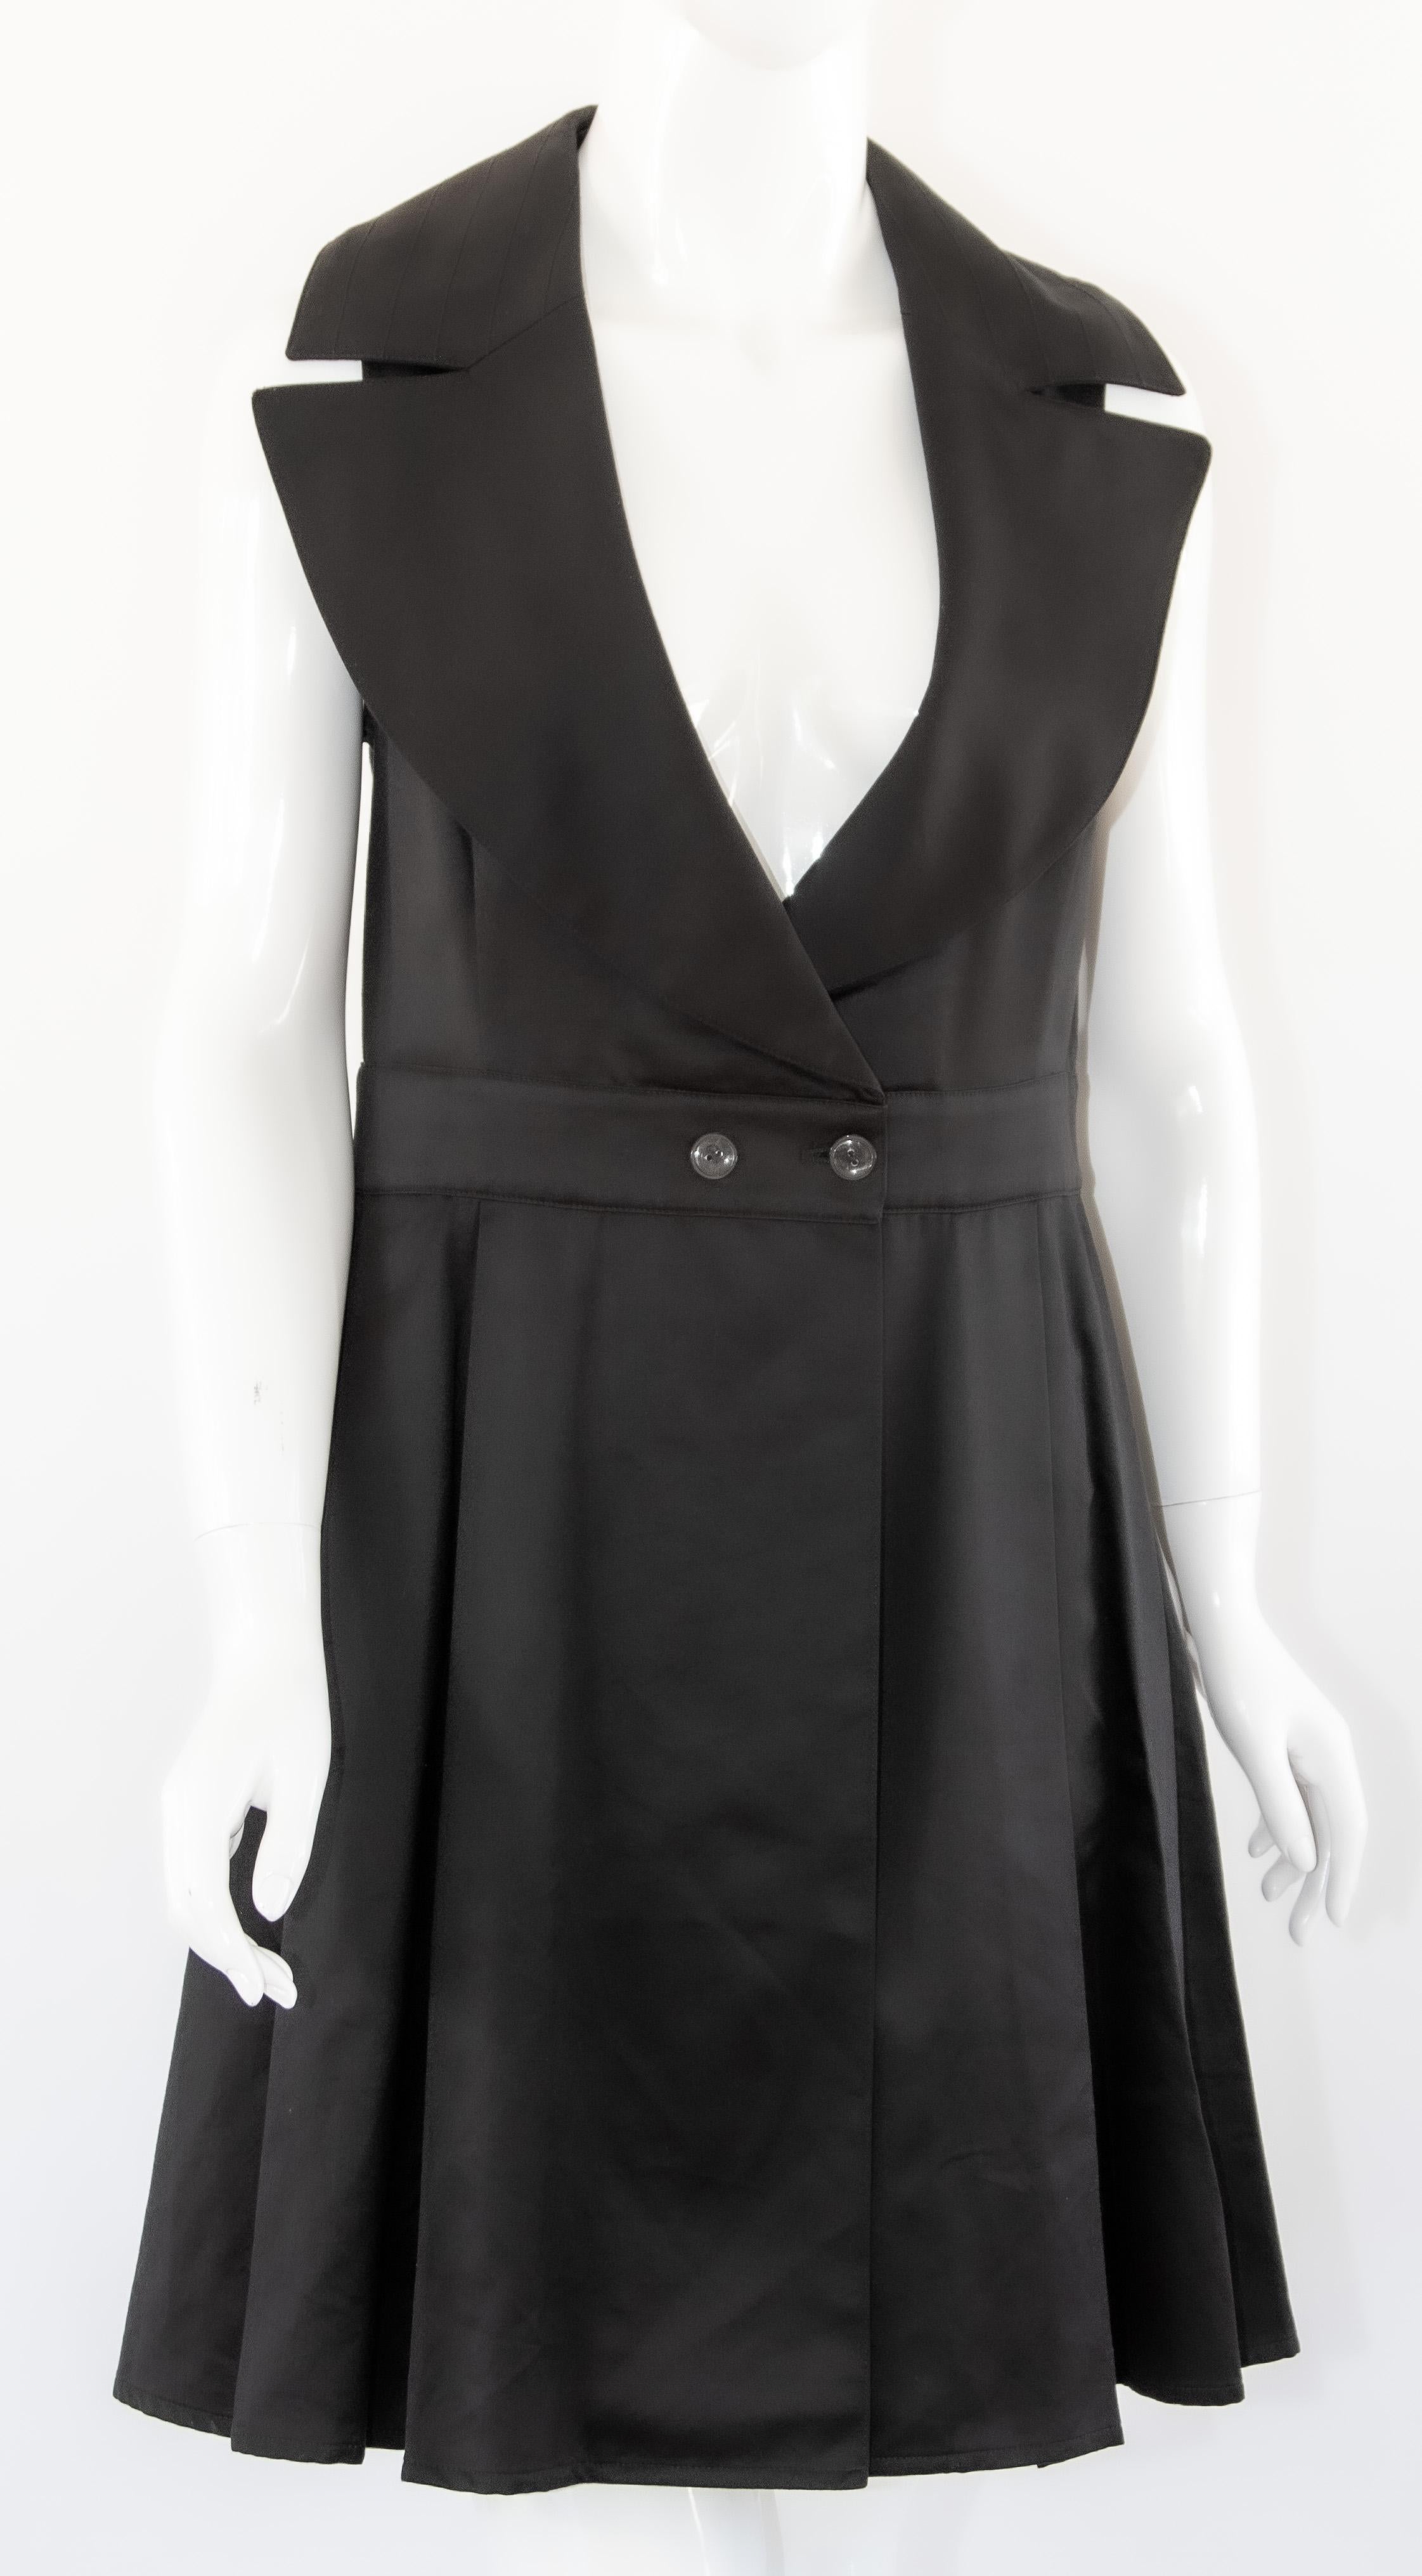 Claude Montana black cocktail mini dress.
State of Claude Montana sz 10 little black dress Black sleeveless little cocktail dress.
Button back mid calf length dress with oversized collar and side pockets. 
Excellent condition. 
Fabric: 100 %